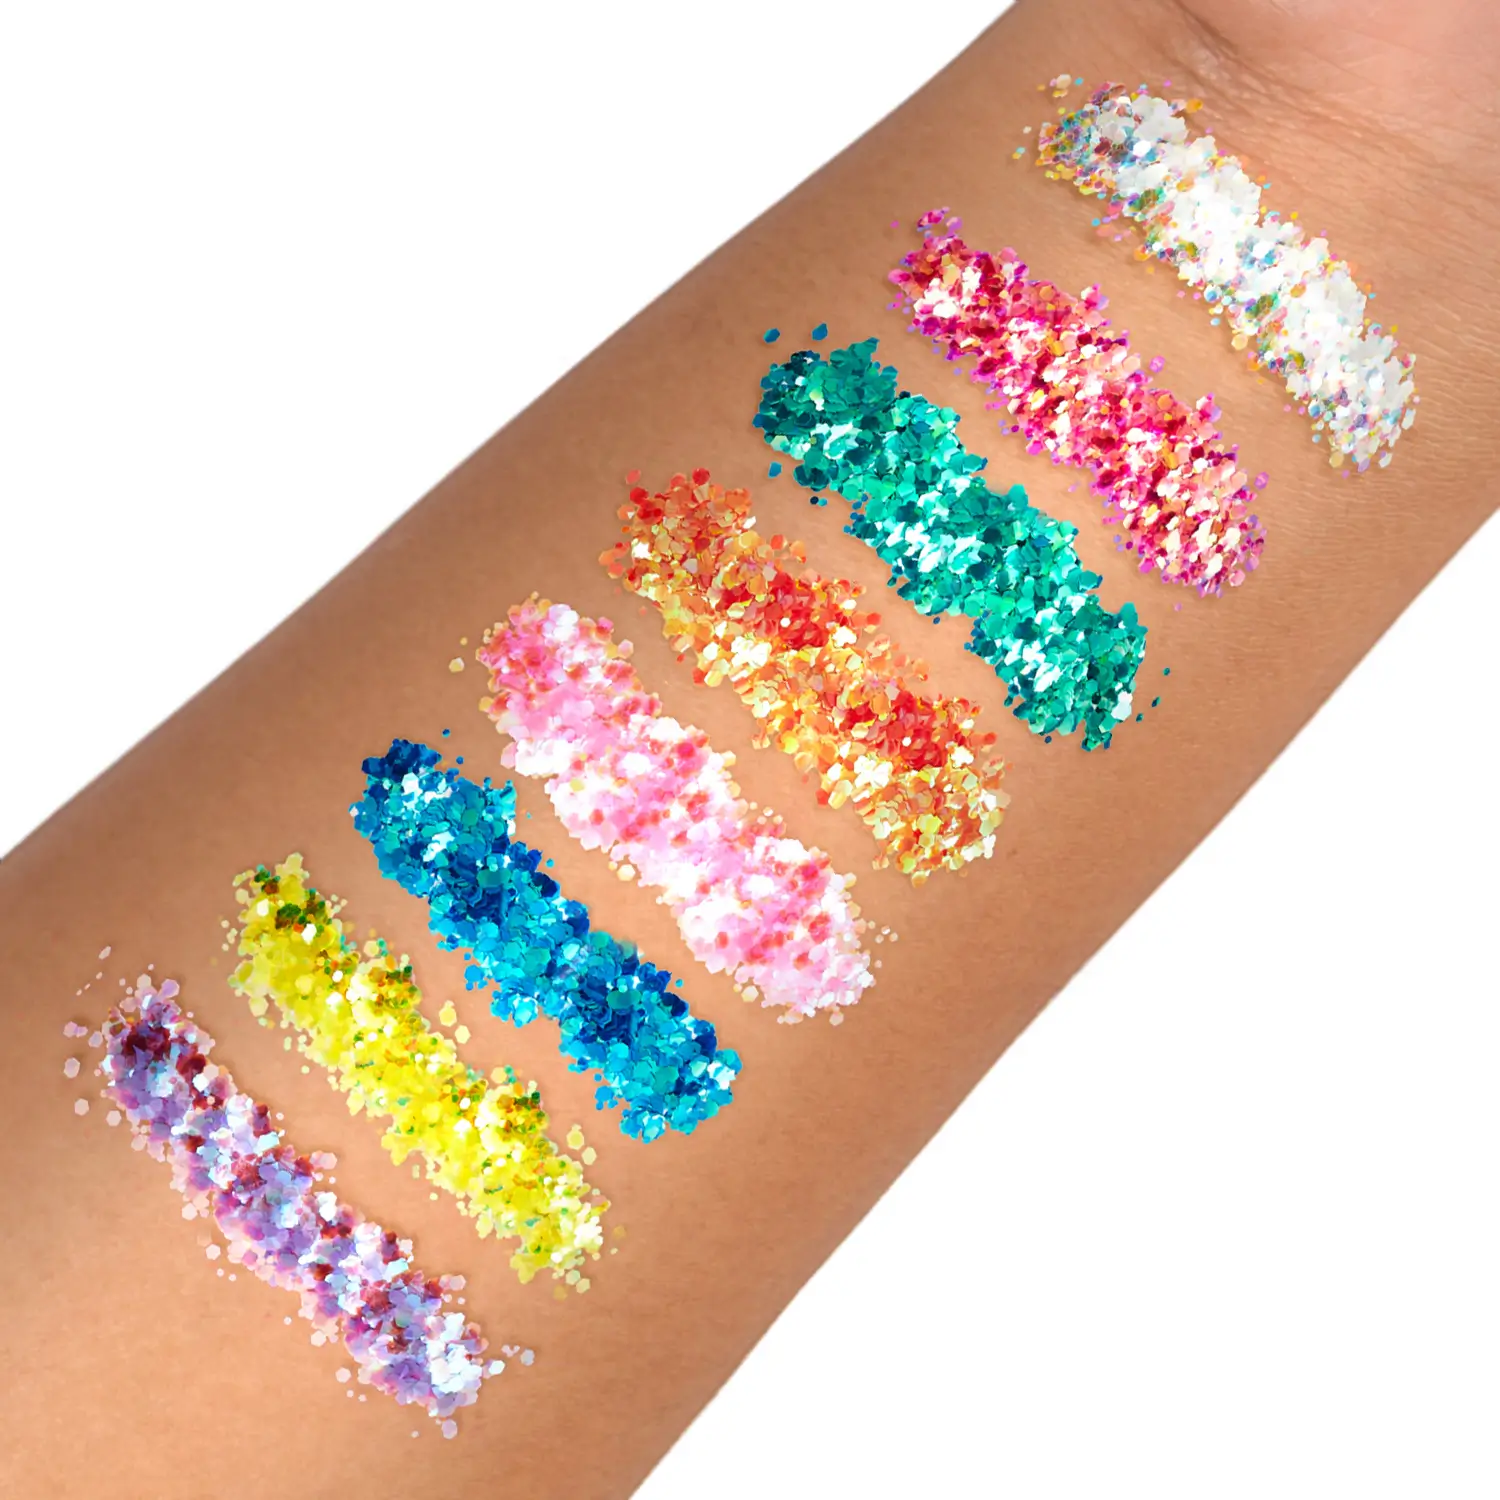 Fantasy Iridescent Chunky Glitter Pot Swatch by Glitter Me Up ™ | PaintGlow